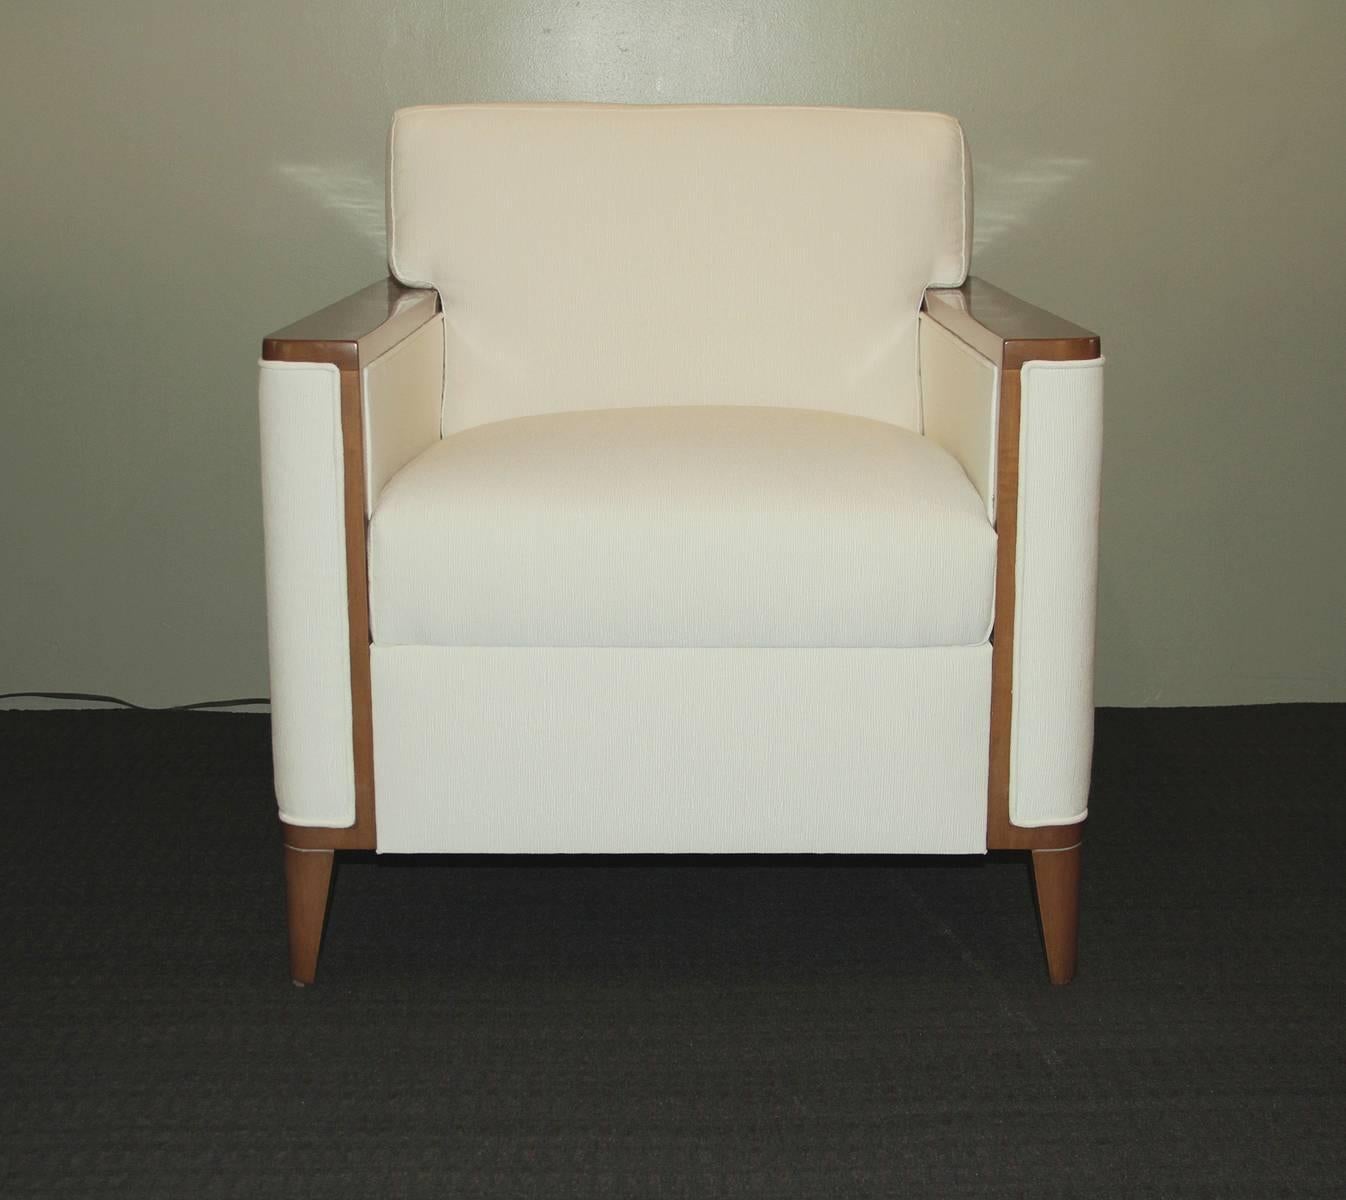 American Pair of Club Chairs from a Private Theater, circa 1950-1960